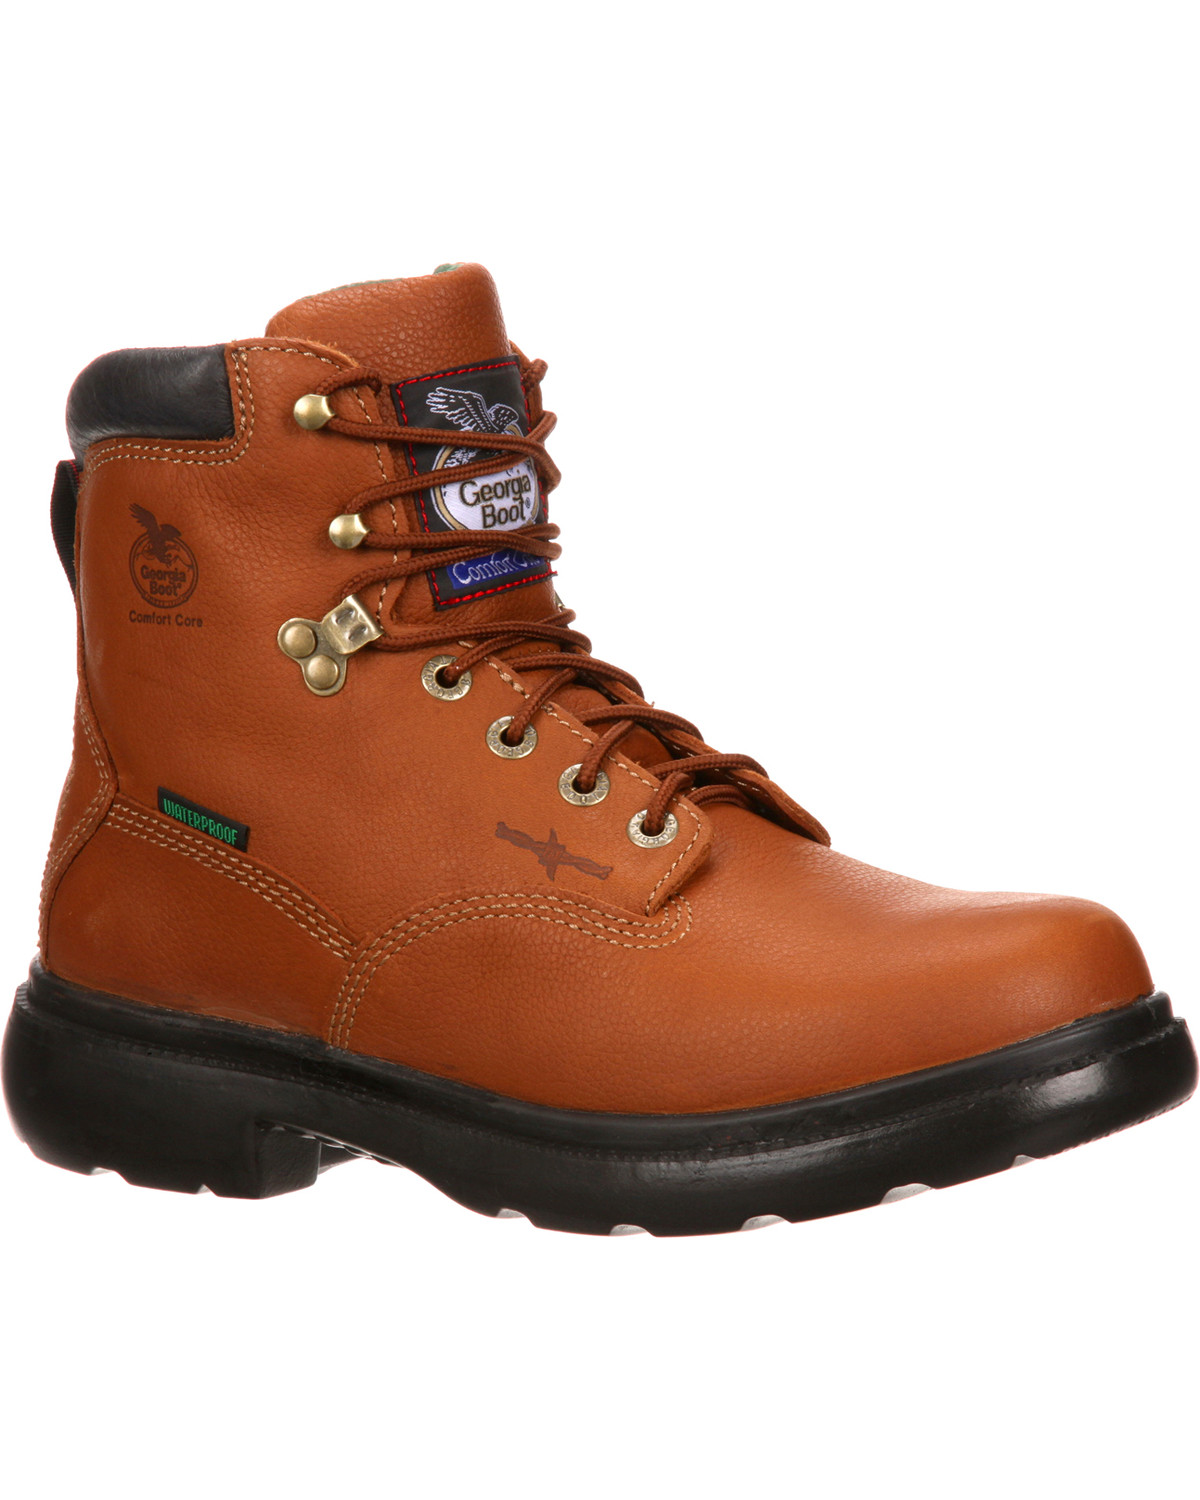 Georgia Boot Men's Farm and Ranch 6" Waterproof Boots